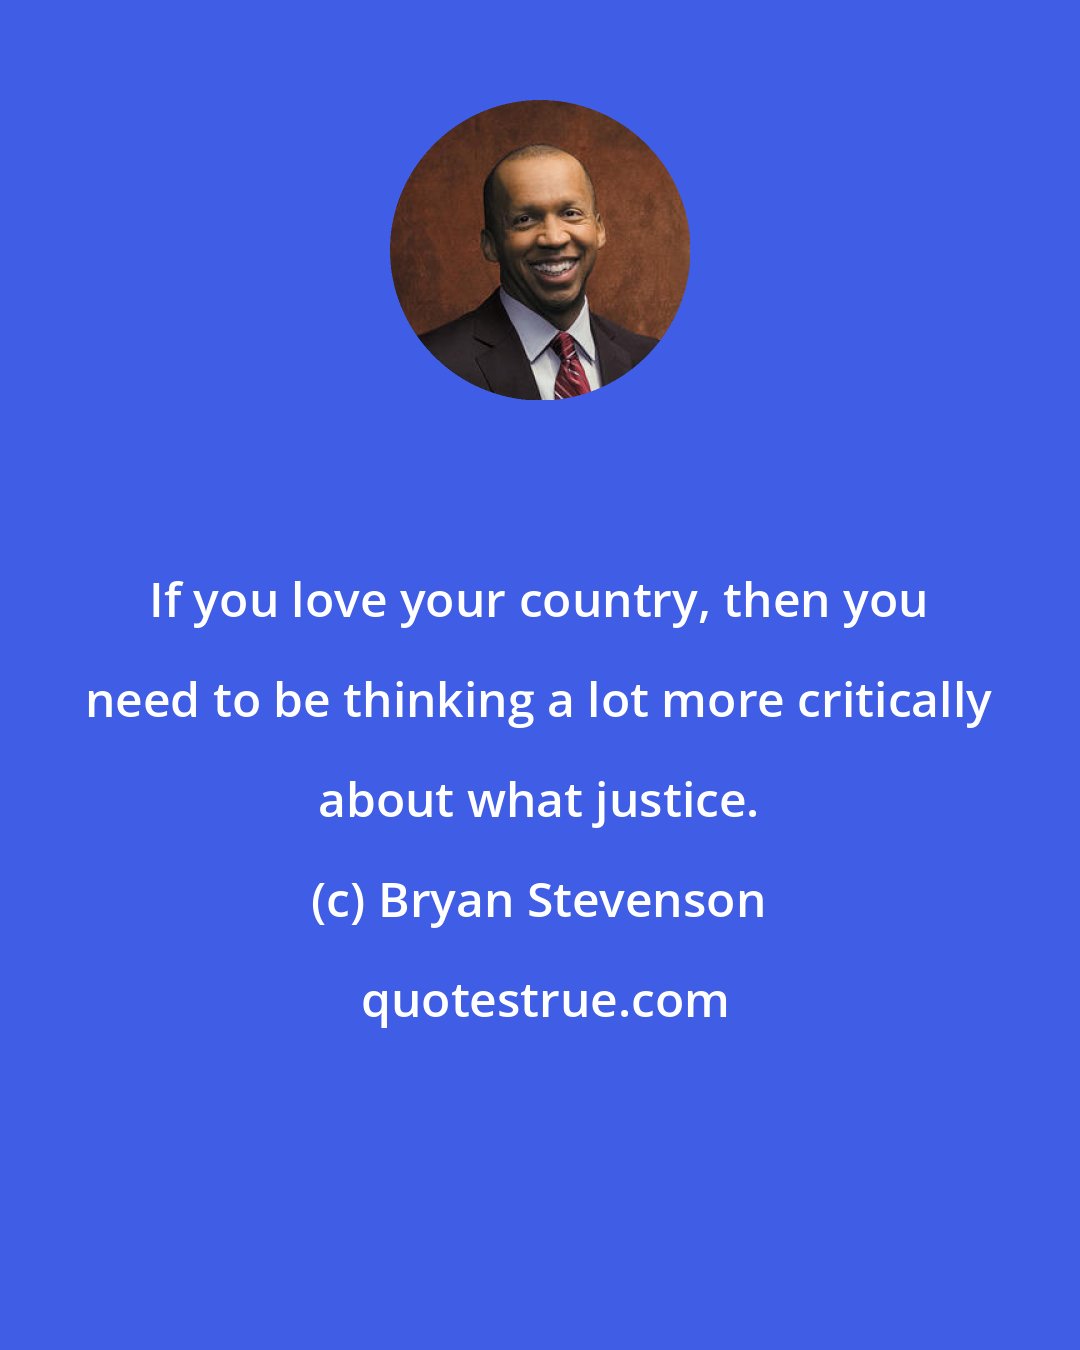 Bryan Stevenson: If you love your country, then you need to be thinking a lot more critically about what justice.